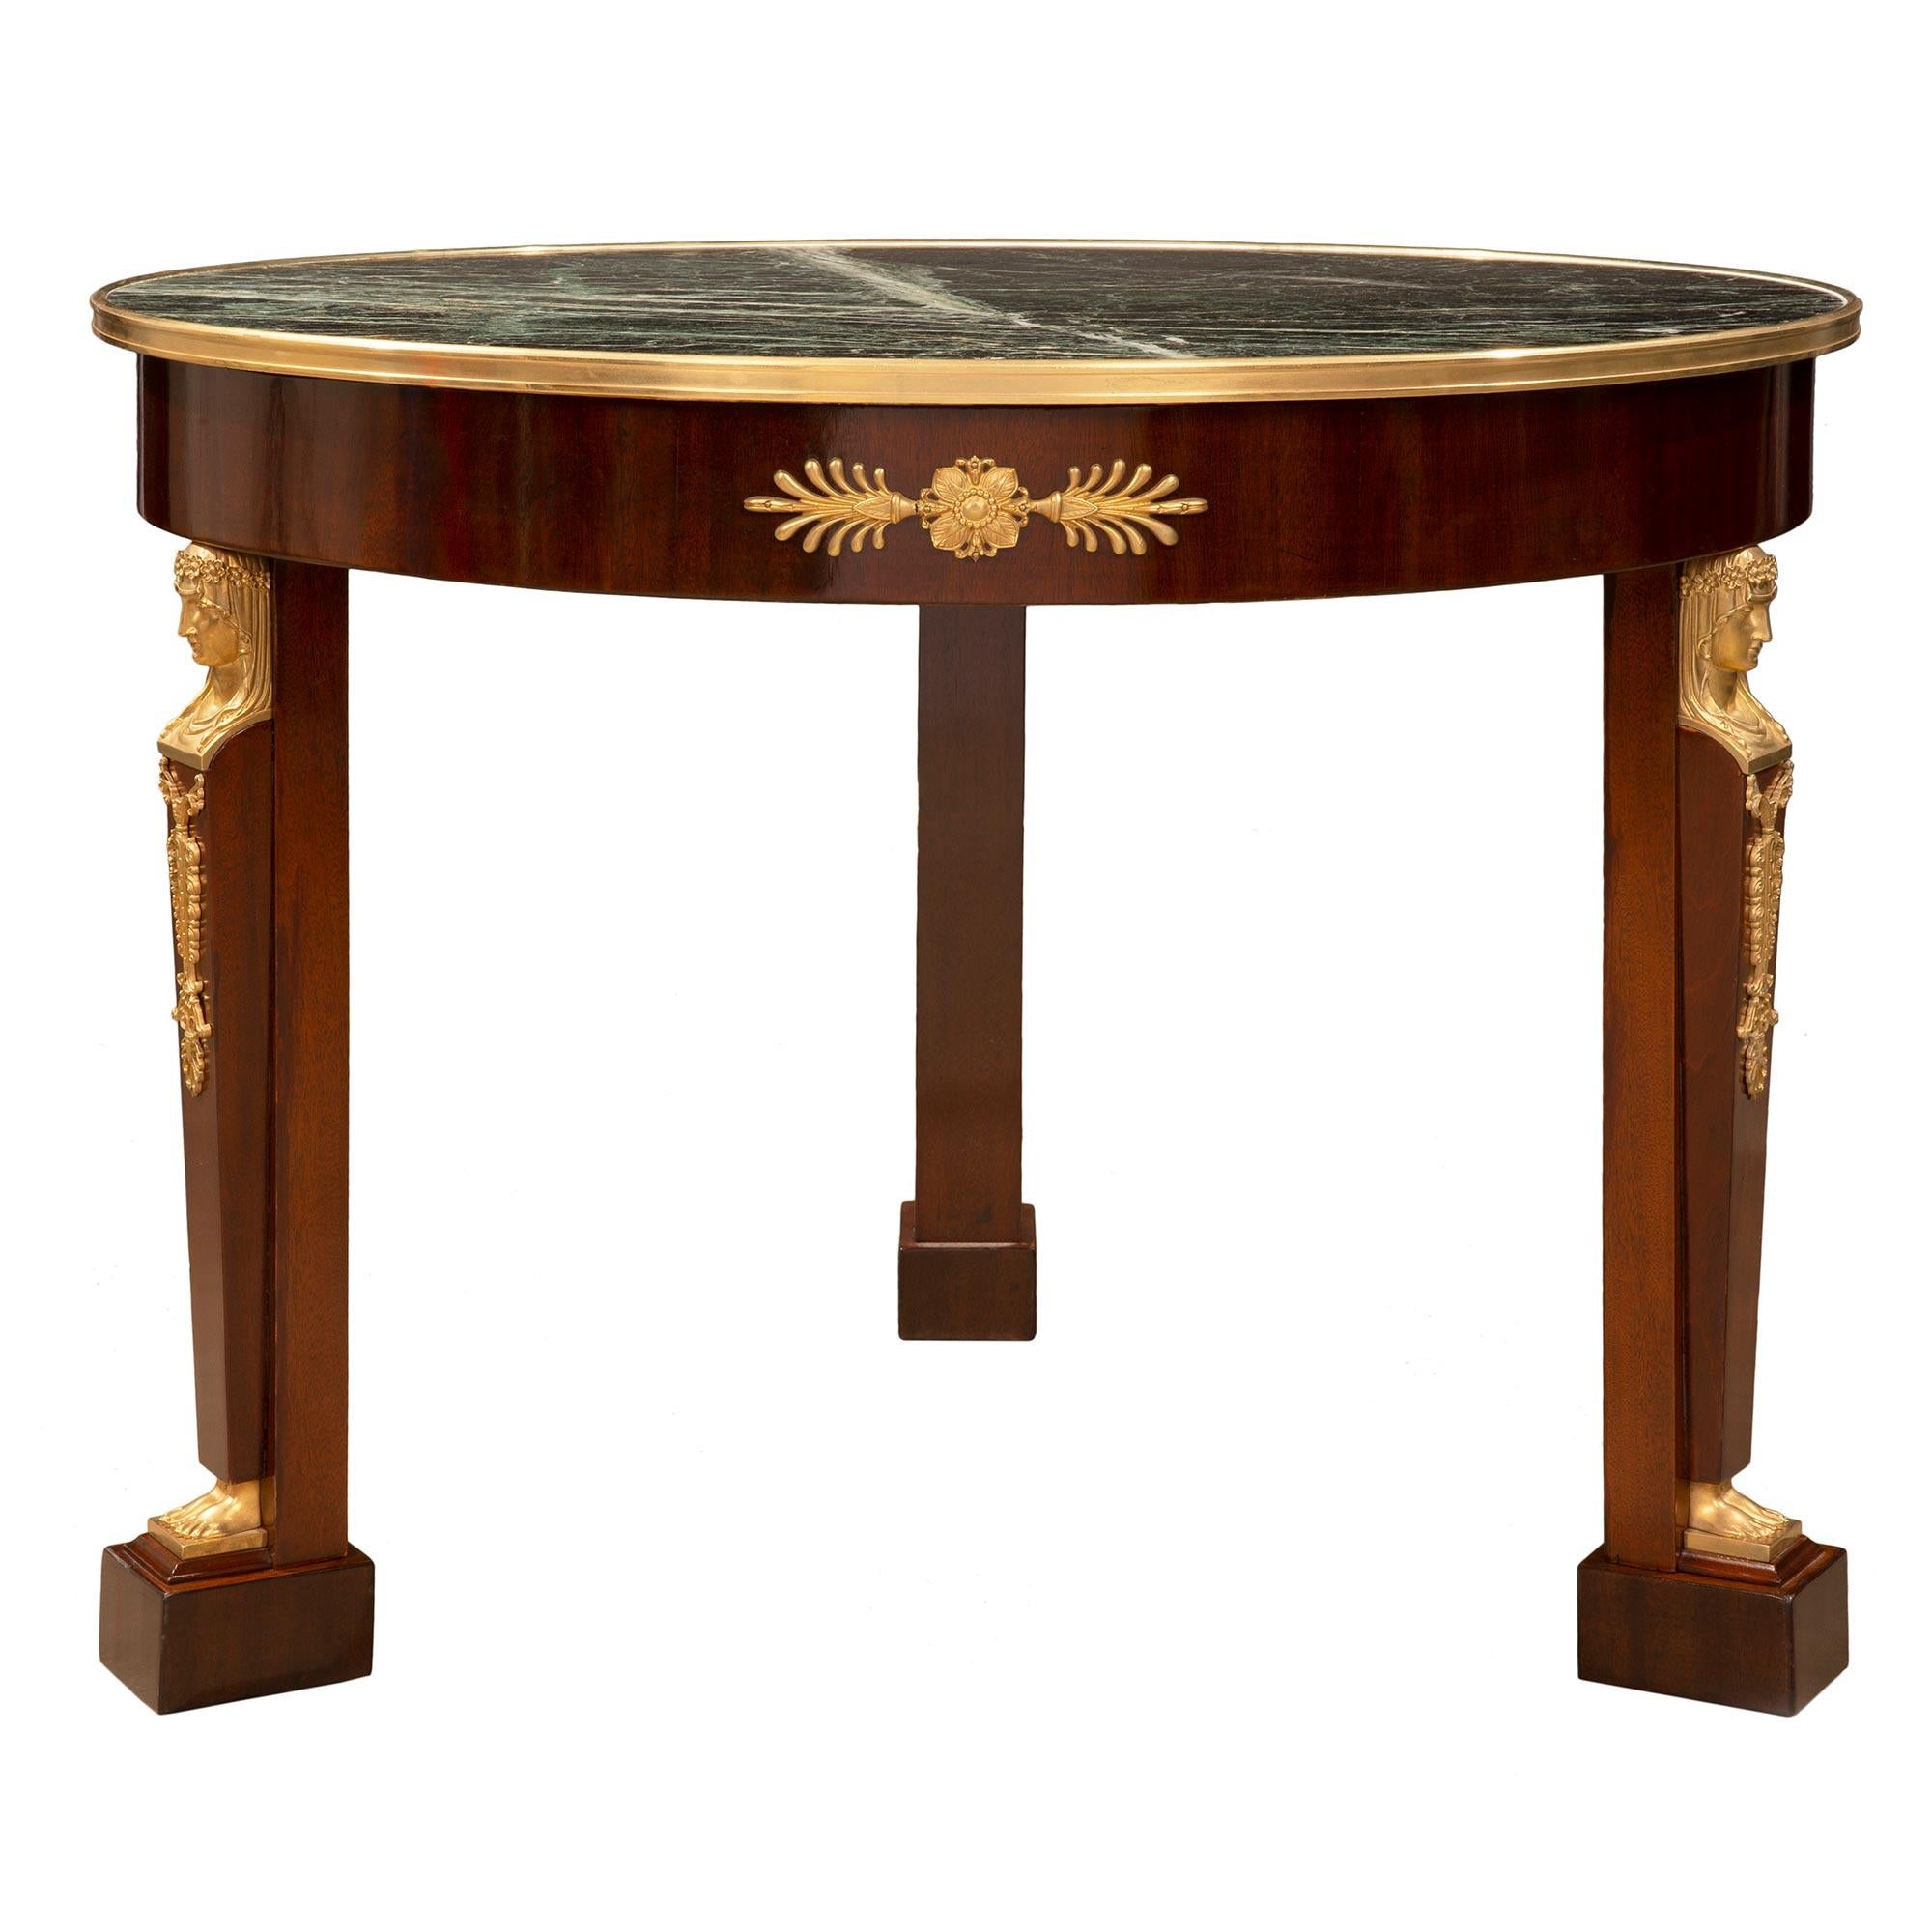 French Mid-19th Century Empire Style Mahogany and Marble Center Table In Good Condition For Sale In West Palm Beach, FL